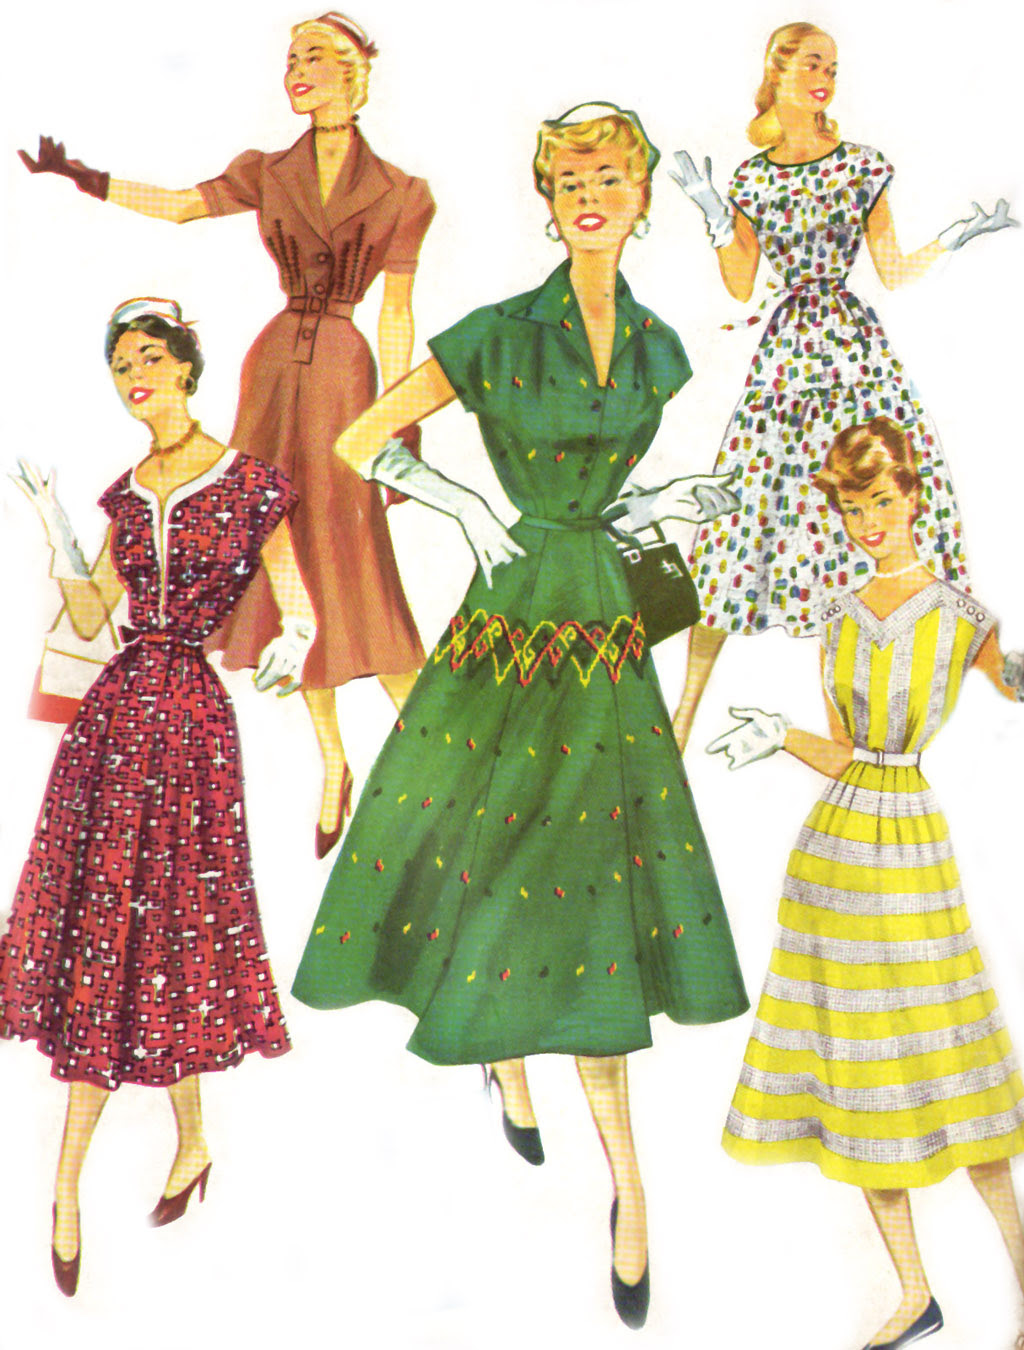 1950s Fashion Is One